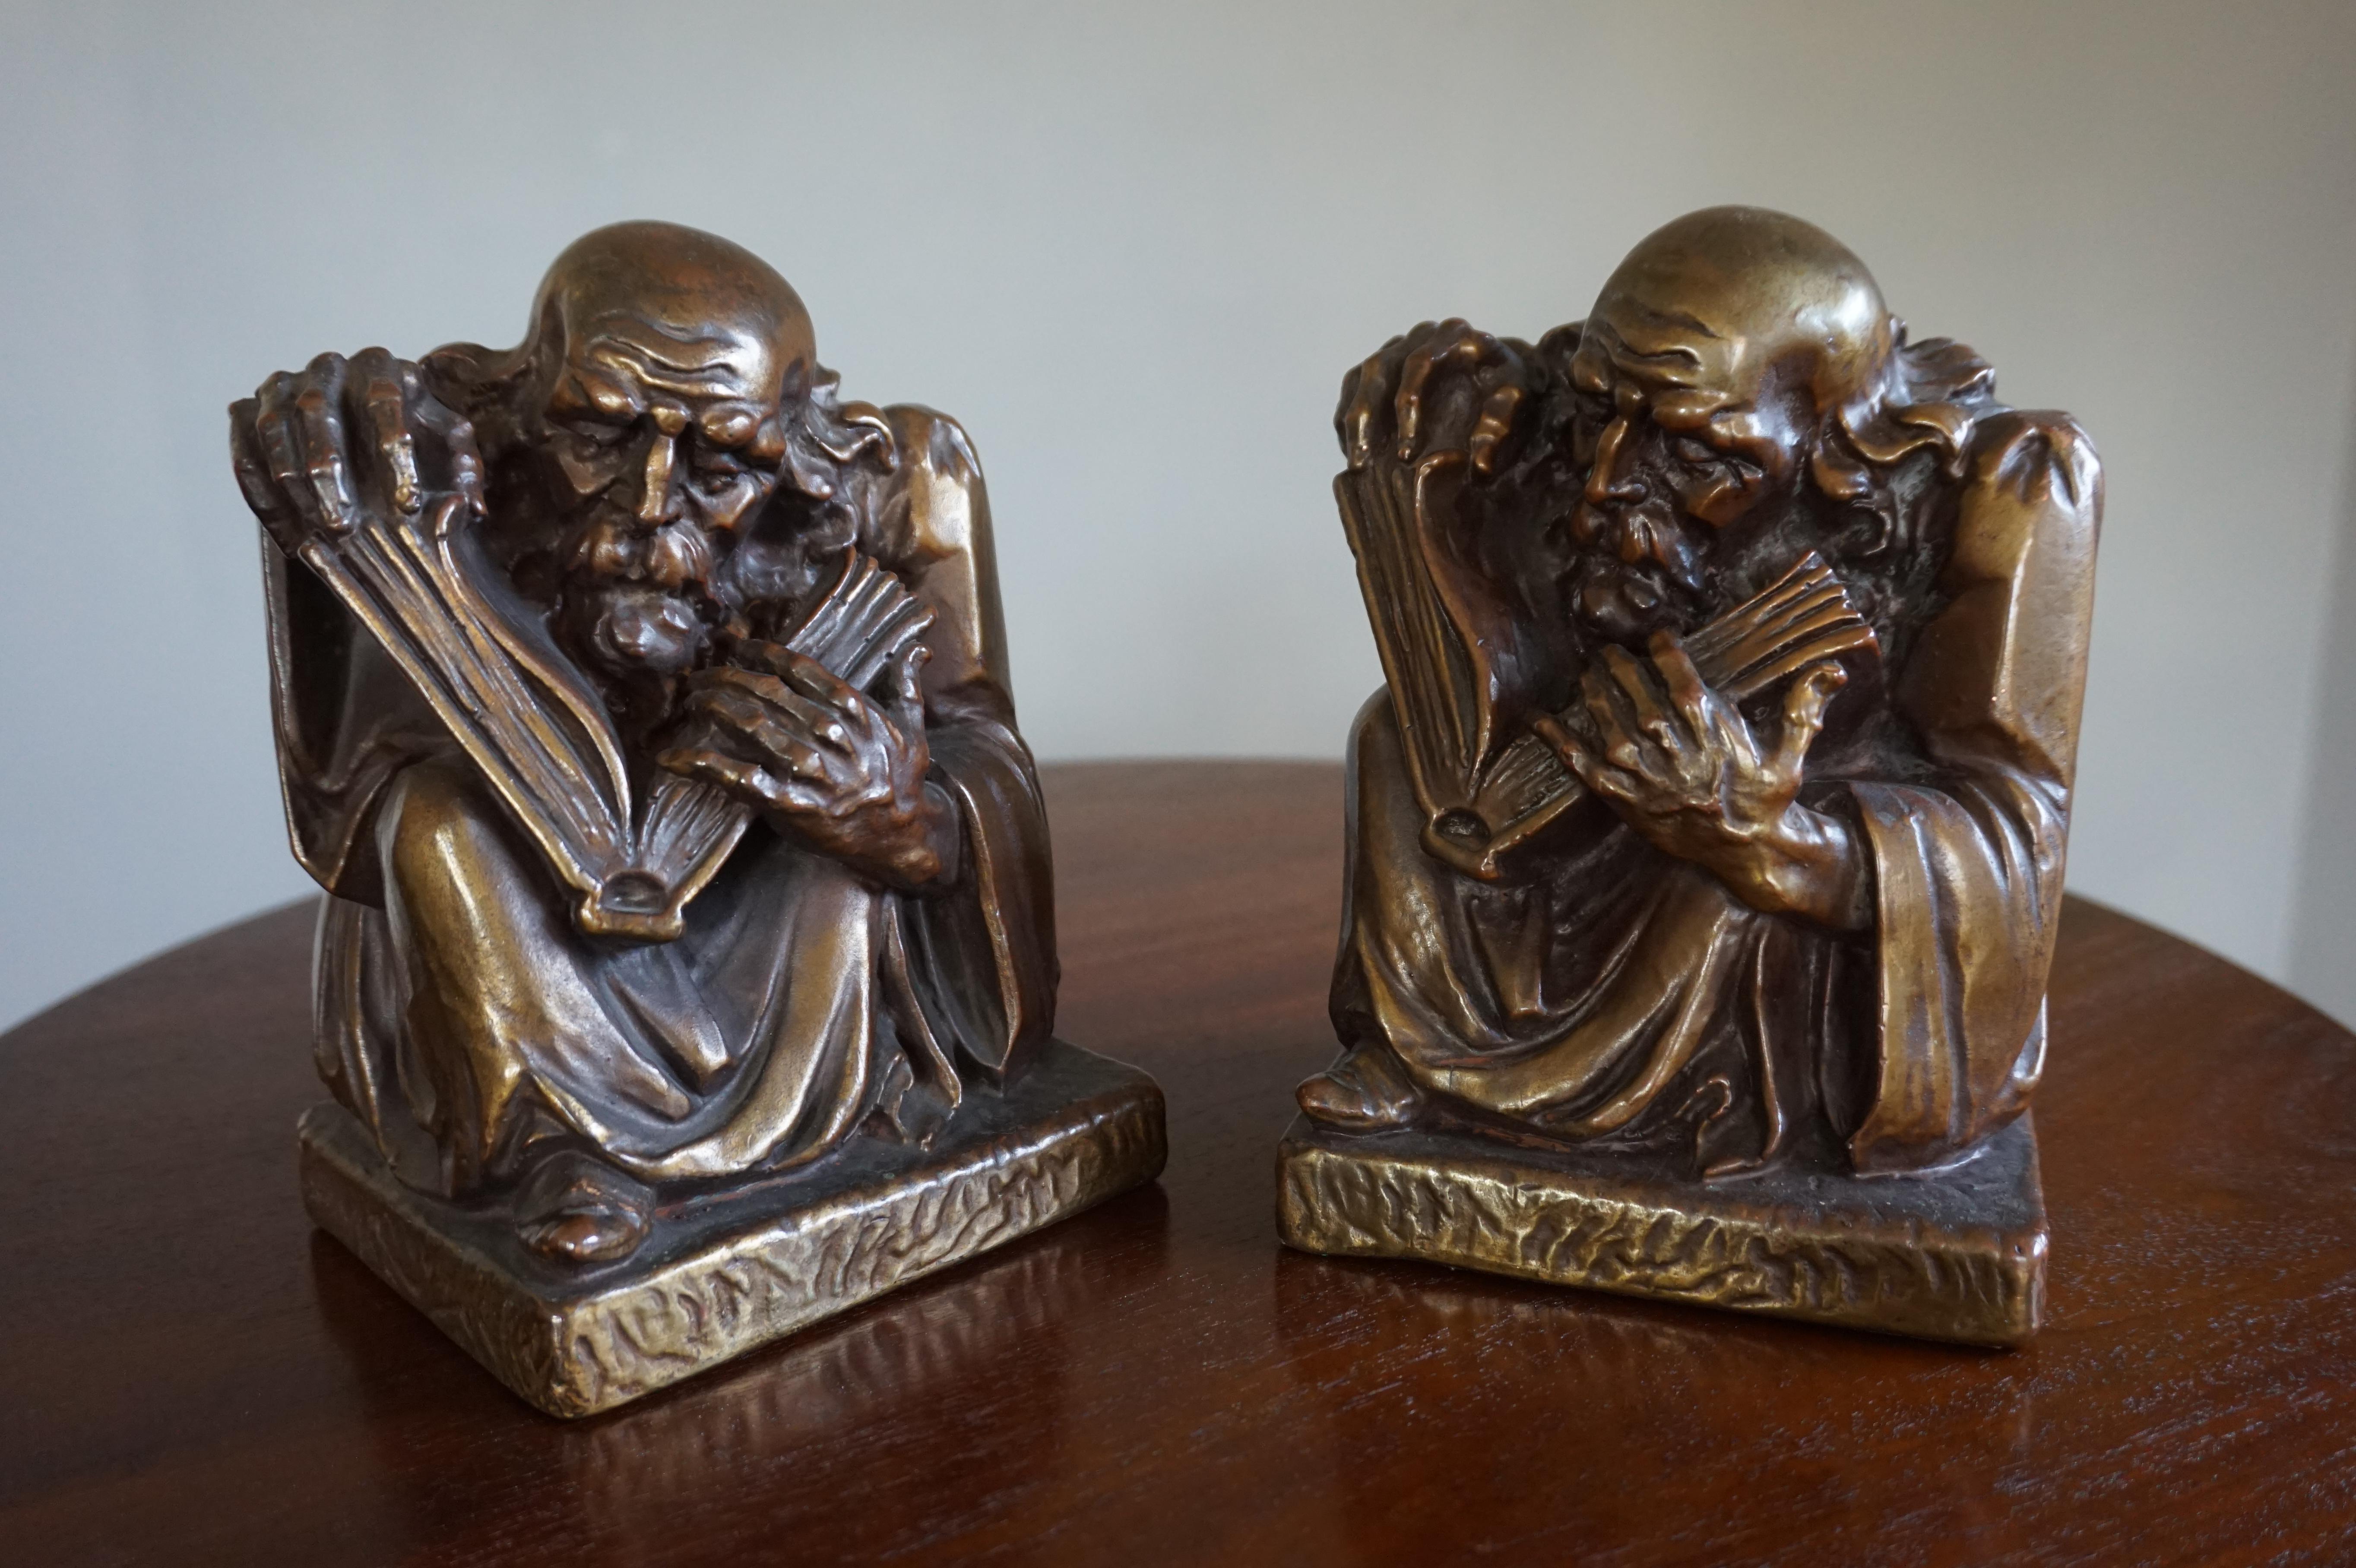 Striking early 20th century bookends with maker's mark.

Since mediëval times alchemy has been part of virtually all cultures around the globe. The artist who created these stunning bookends must have been inspired by the archetypes of alchemists